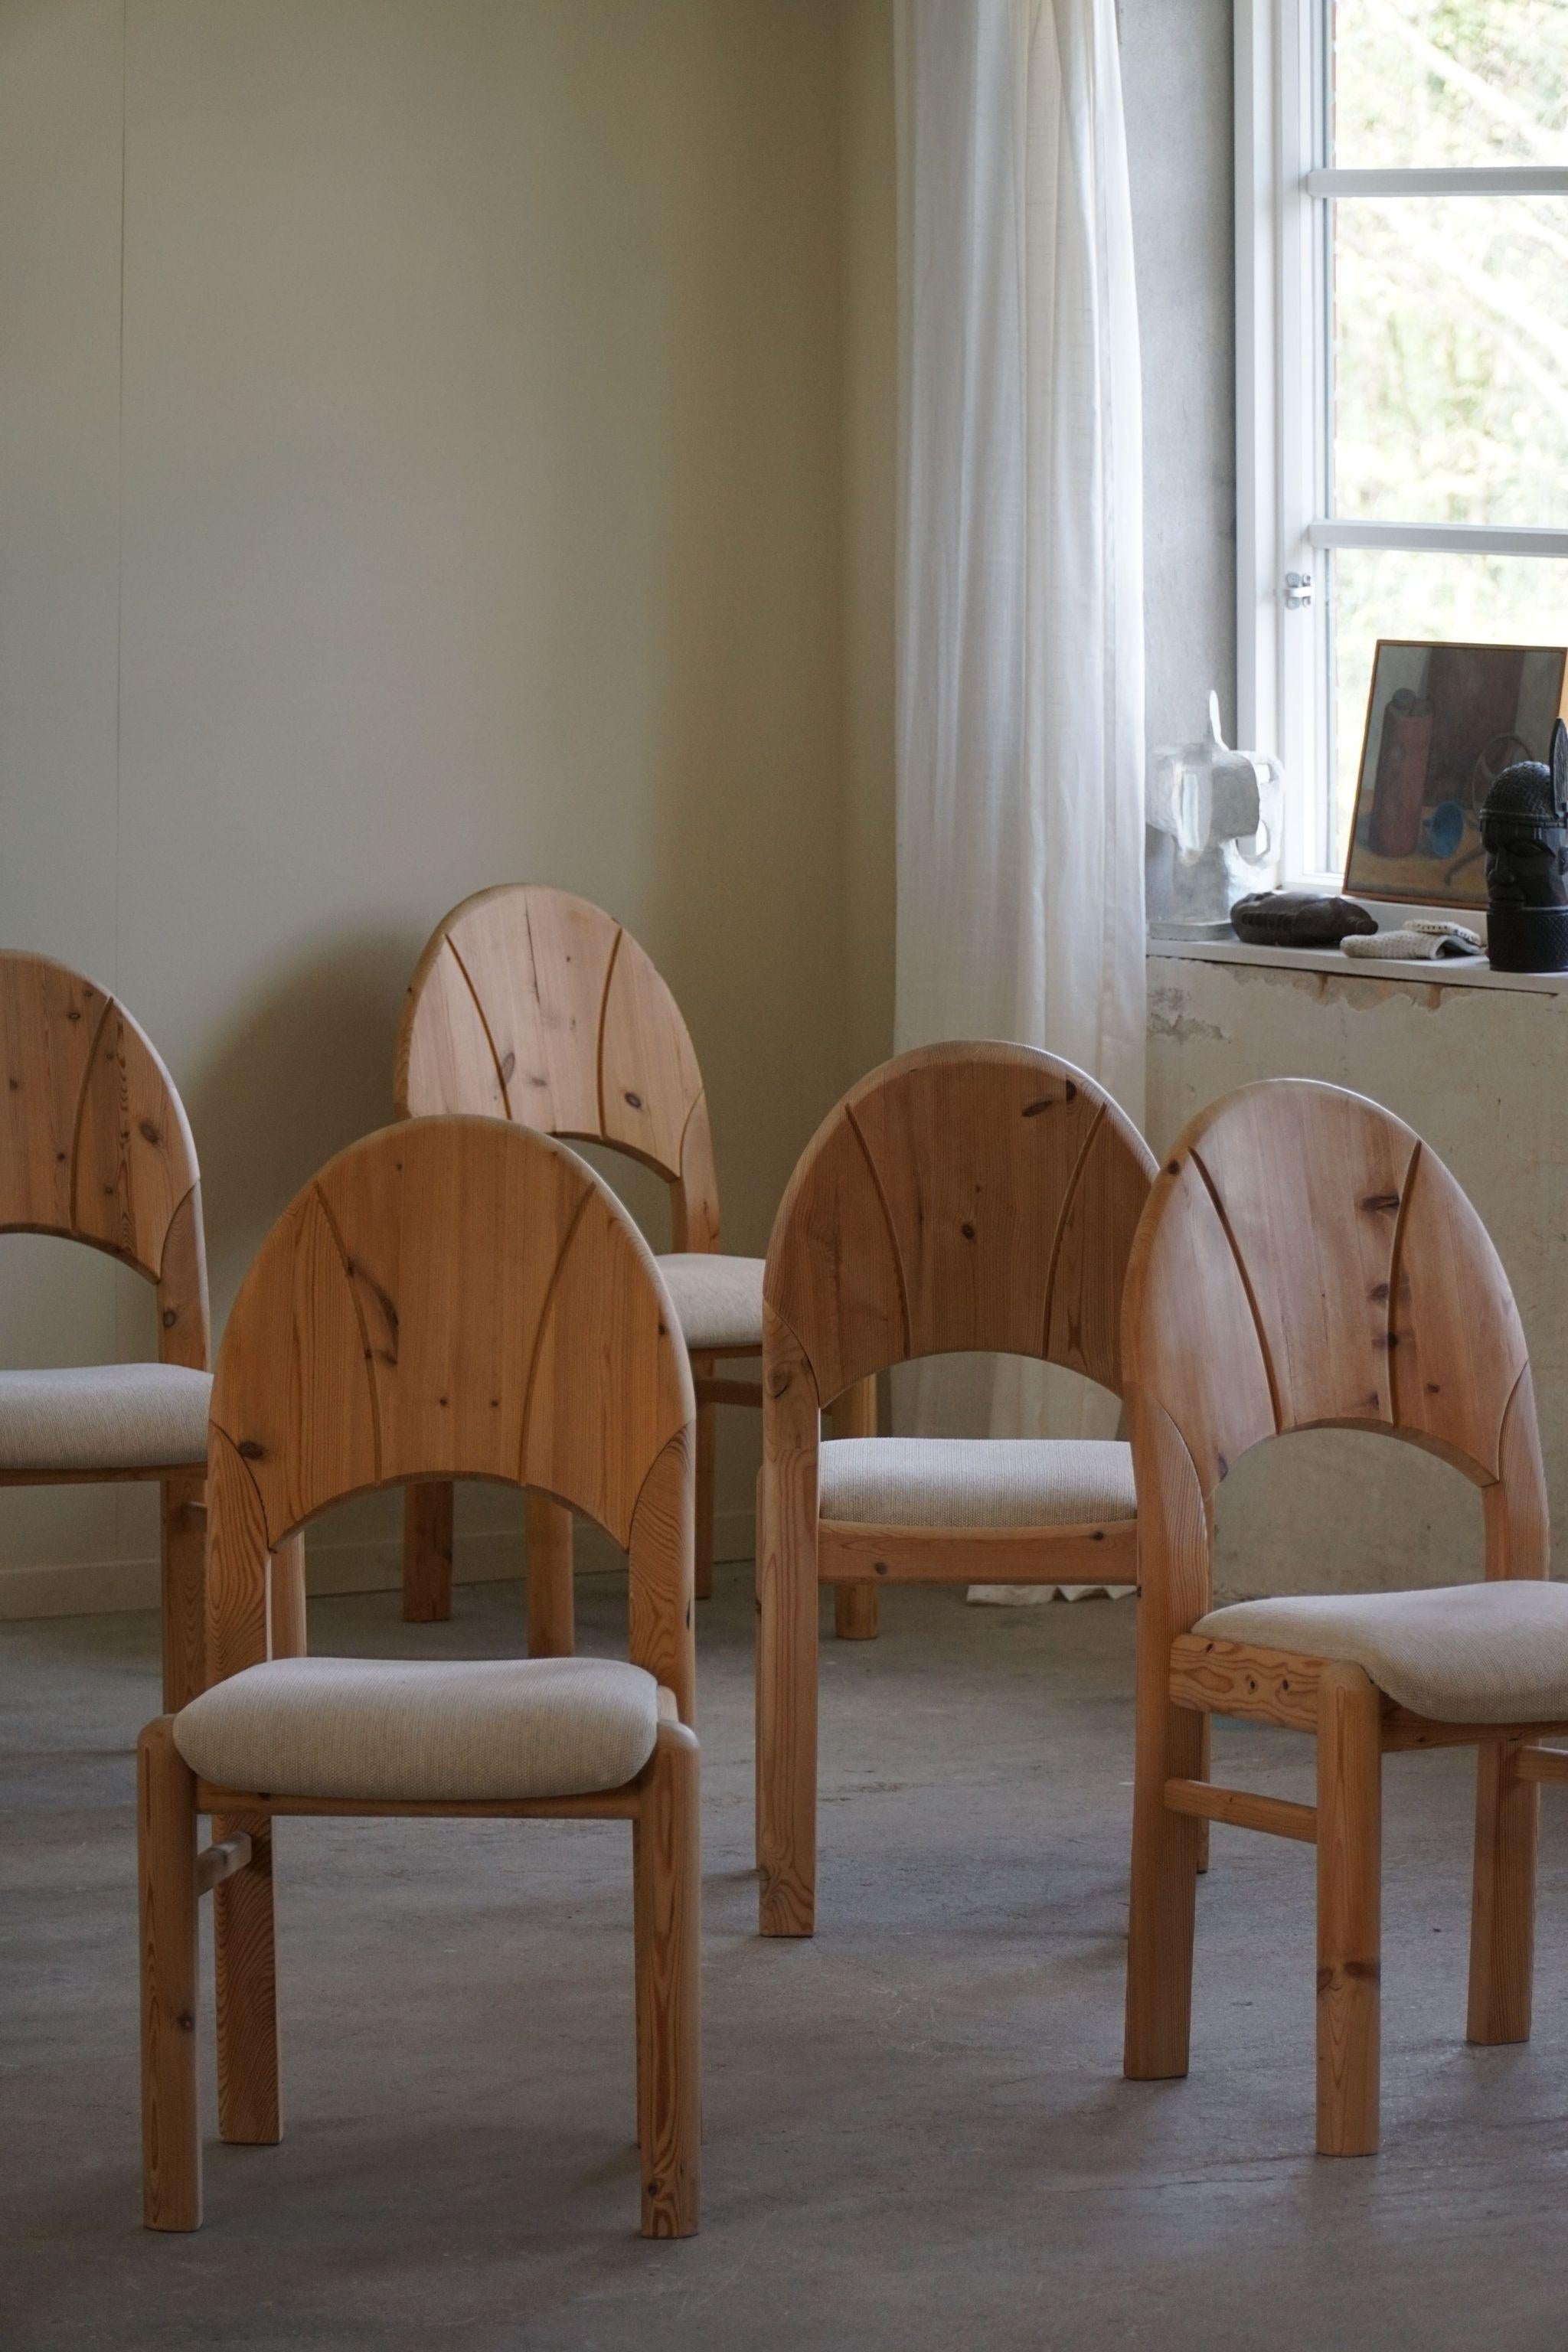 Set of 8 Sculptural Danish Modern Brutalist Chairs in Pine & Wool, 1970s For Sale 5